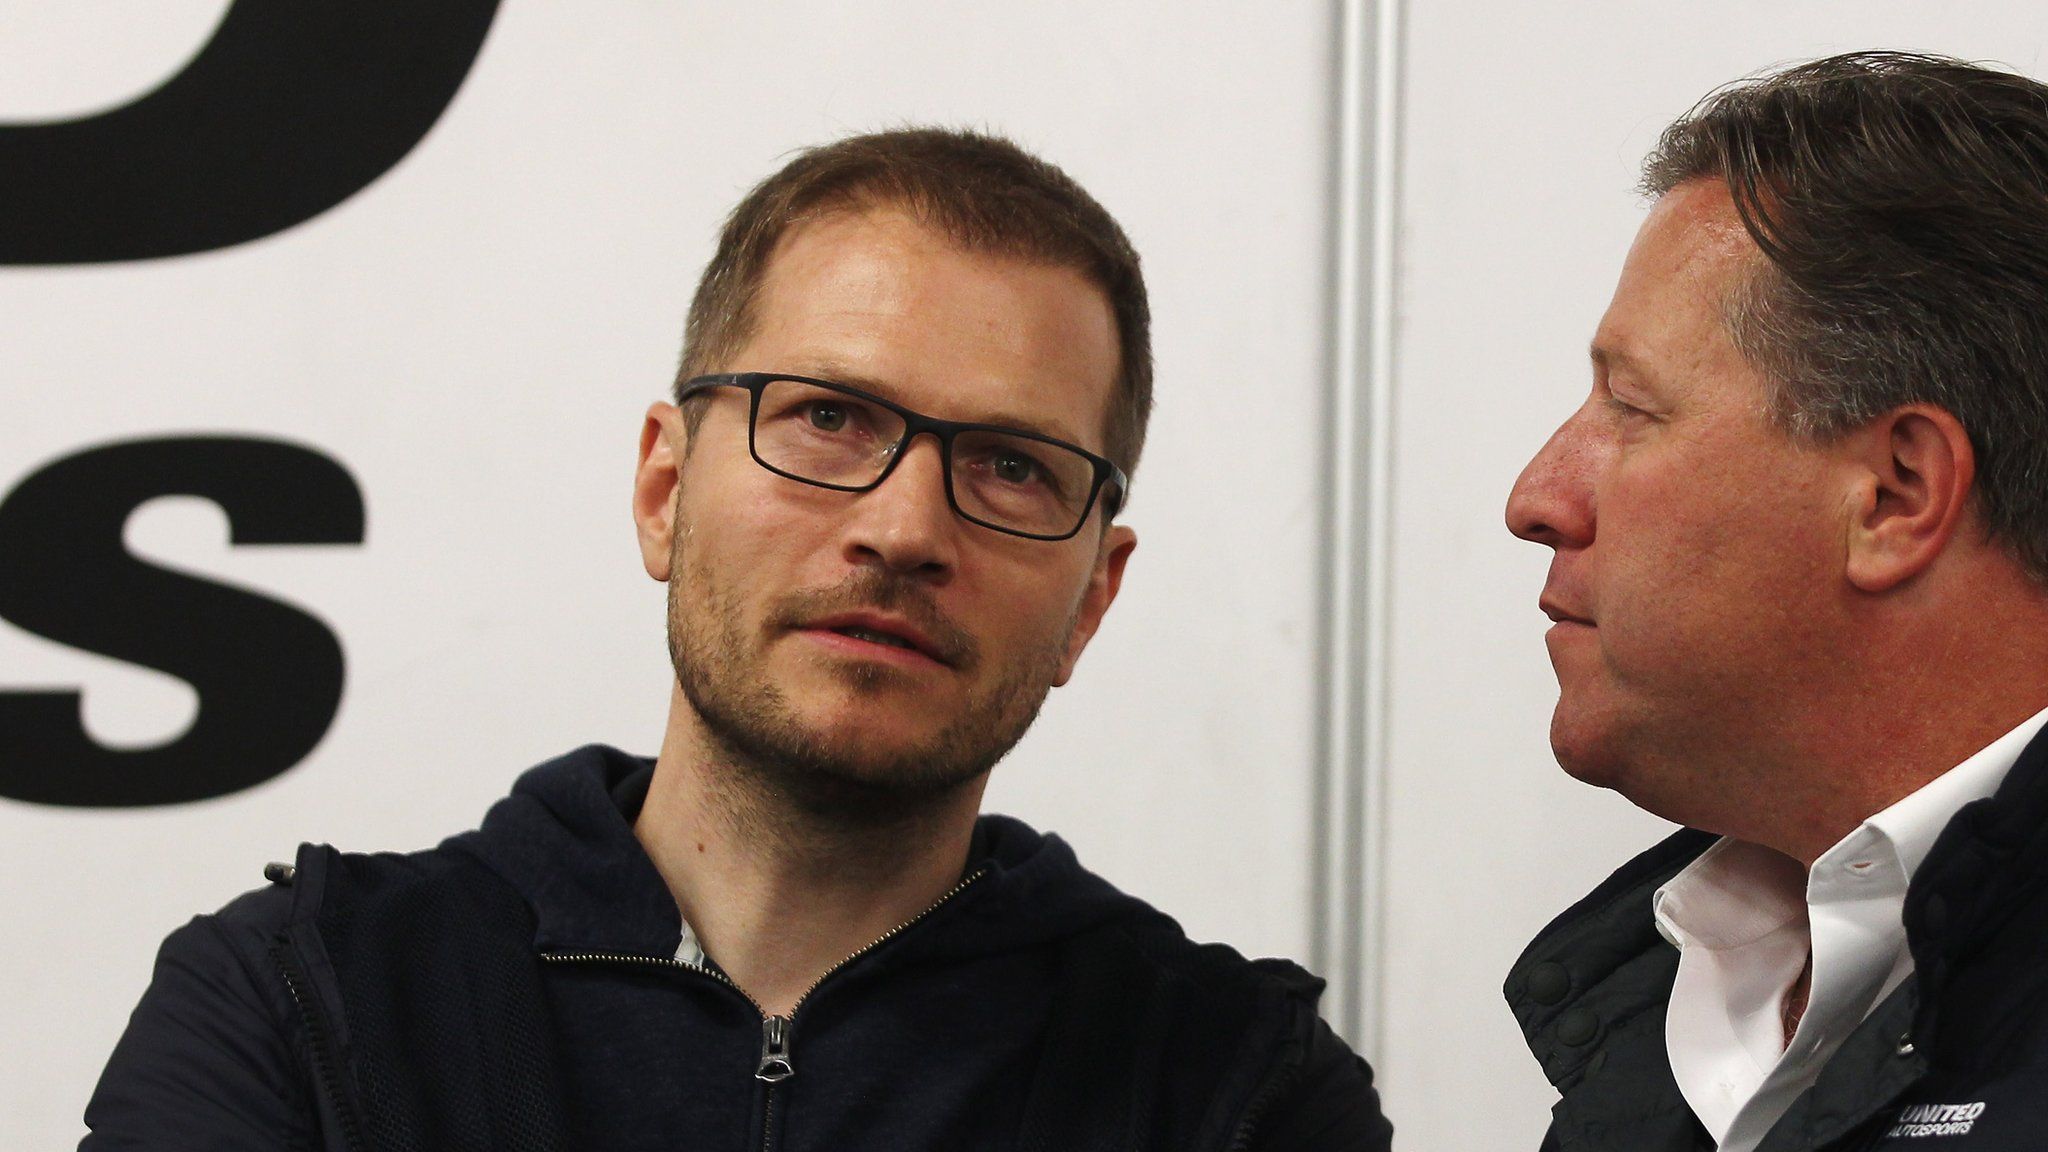 Andreas Seidl and Zak Brown